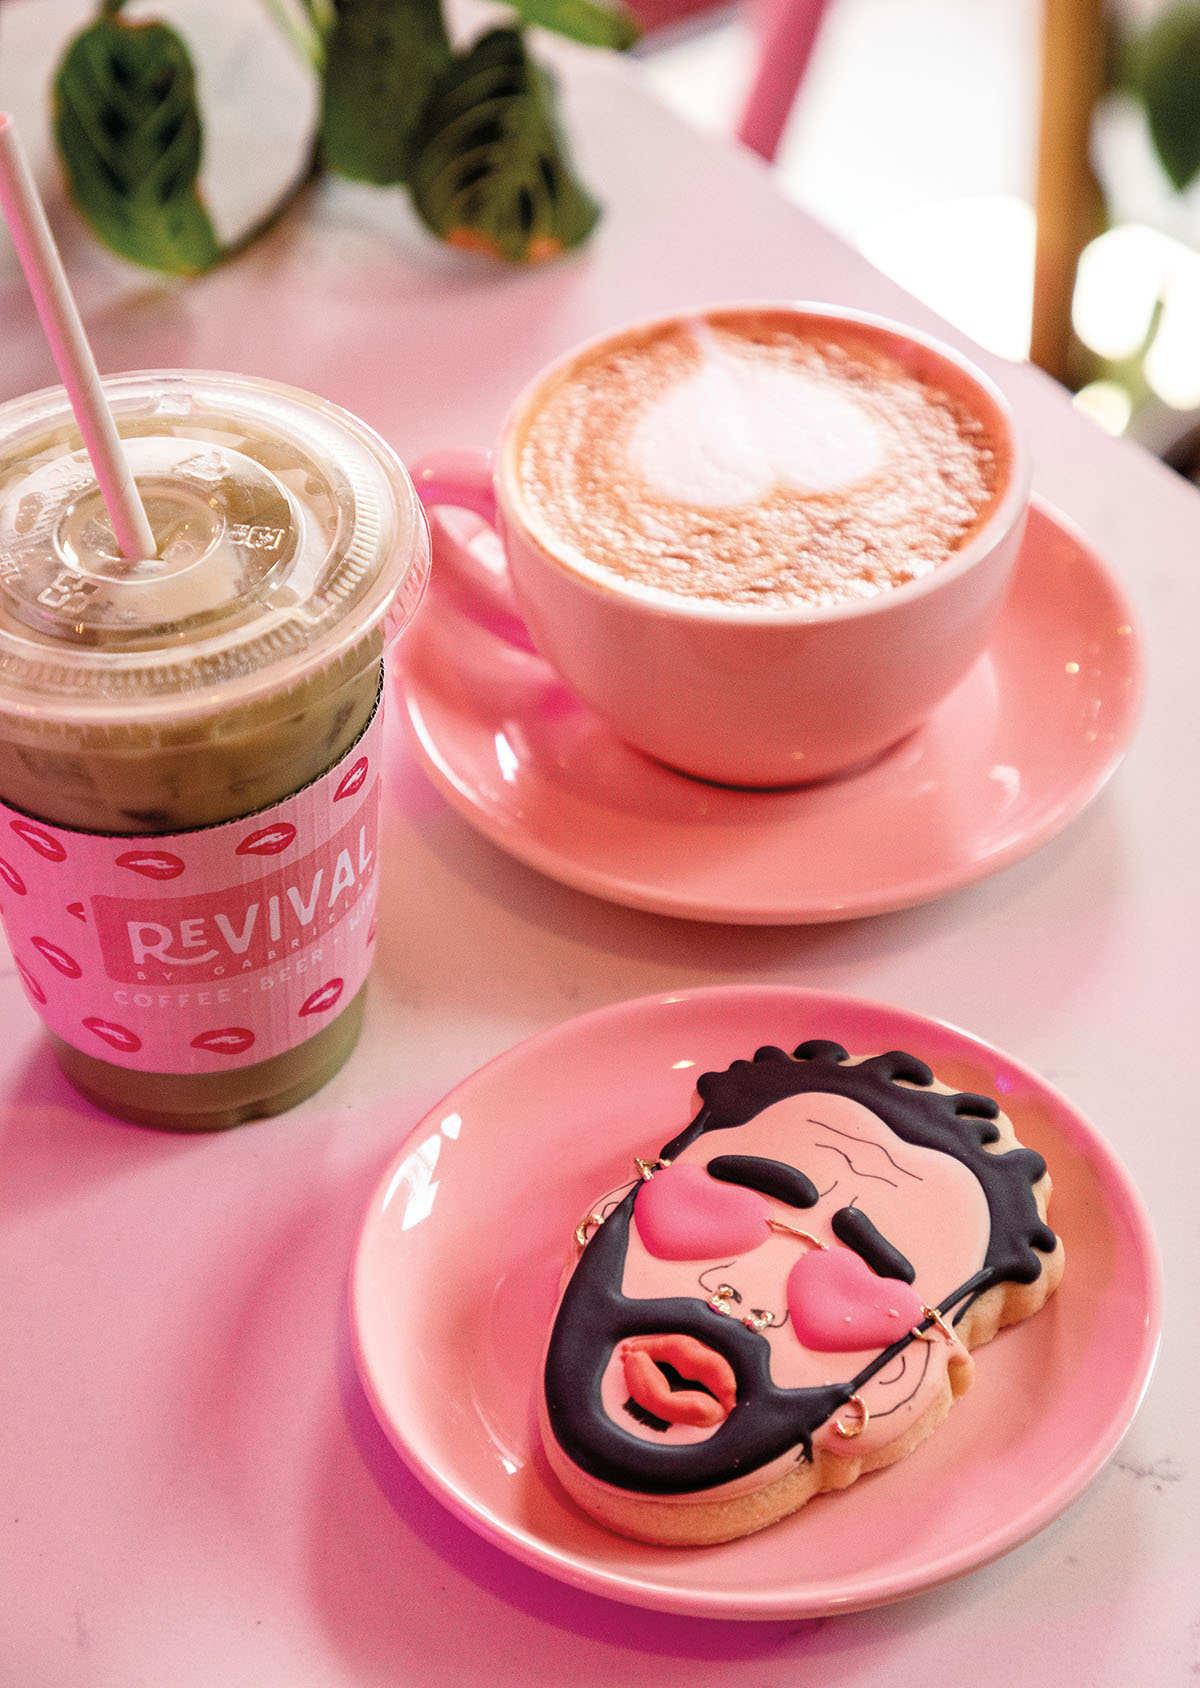 A picture of a latte in a pink ceramic cup, an iced coffee, and a sugar cookie of a man's face wearing pink sunglasses